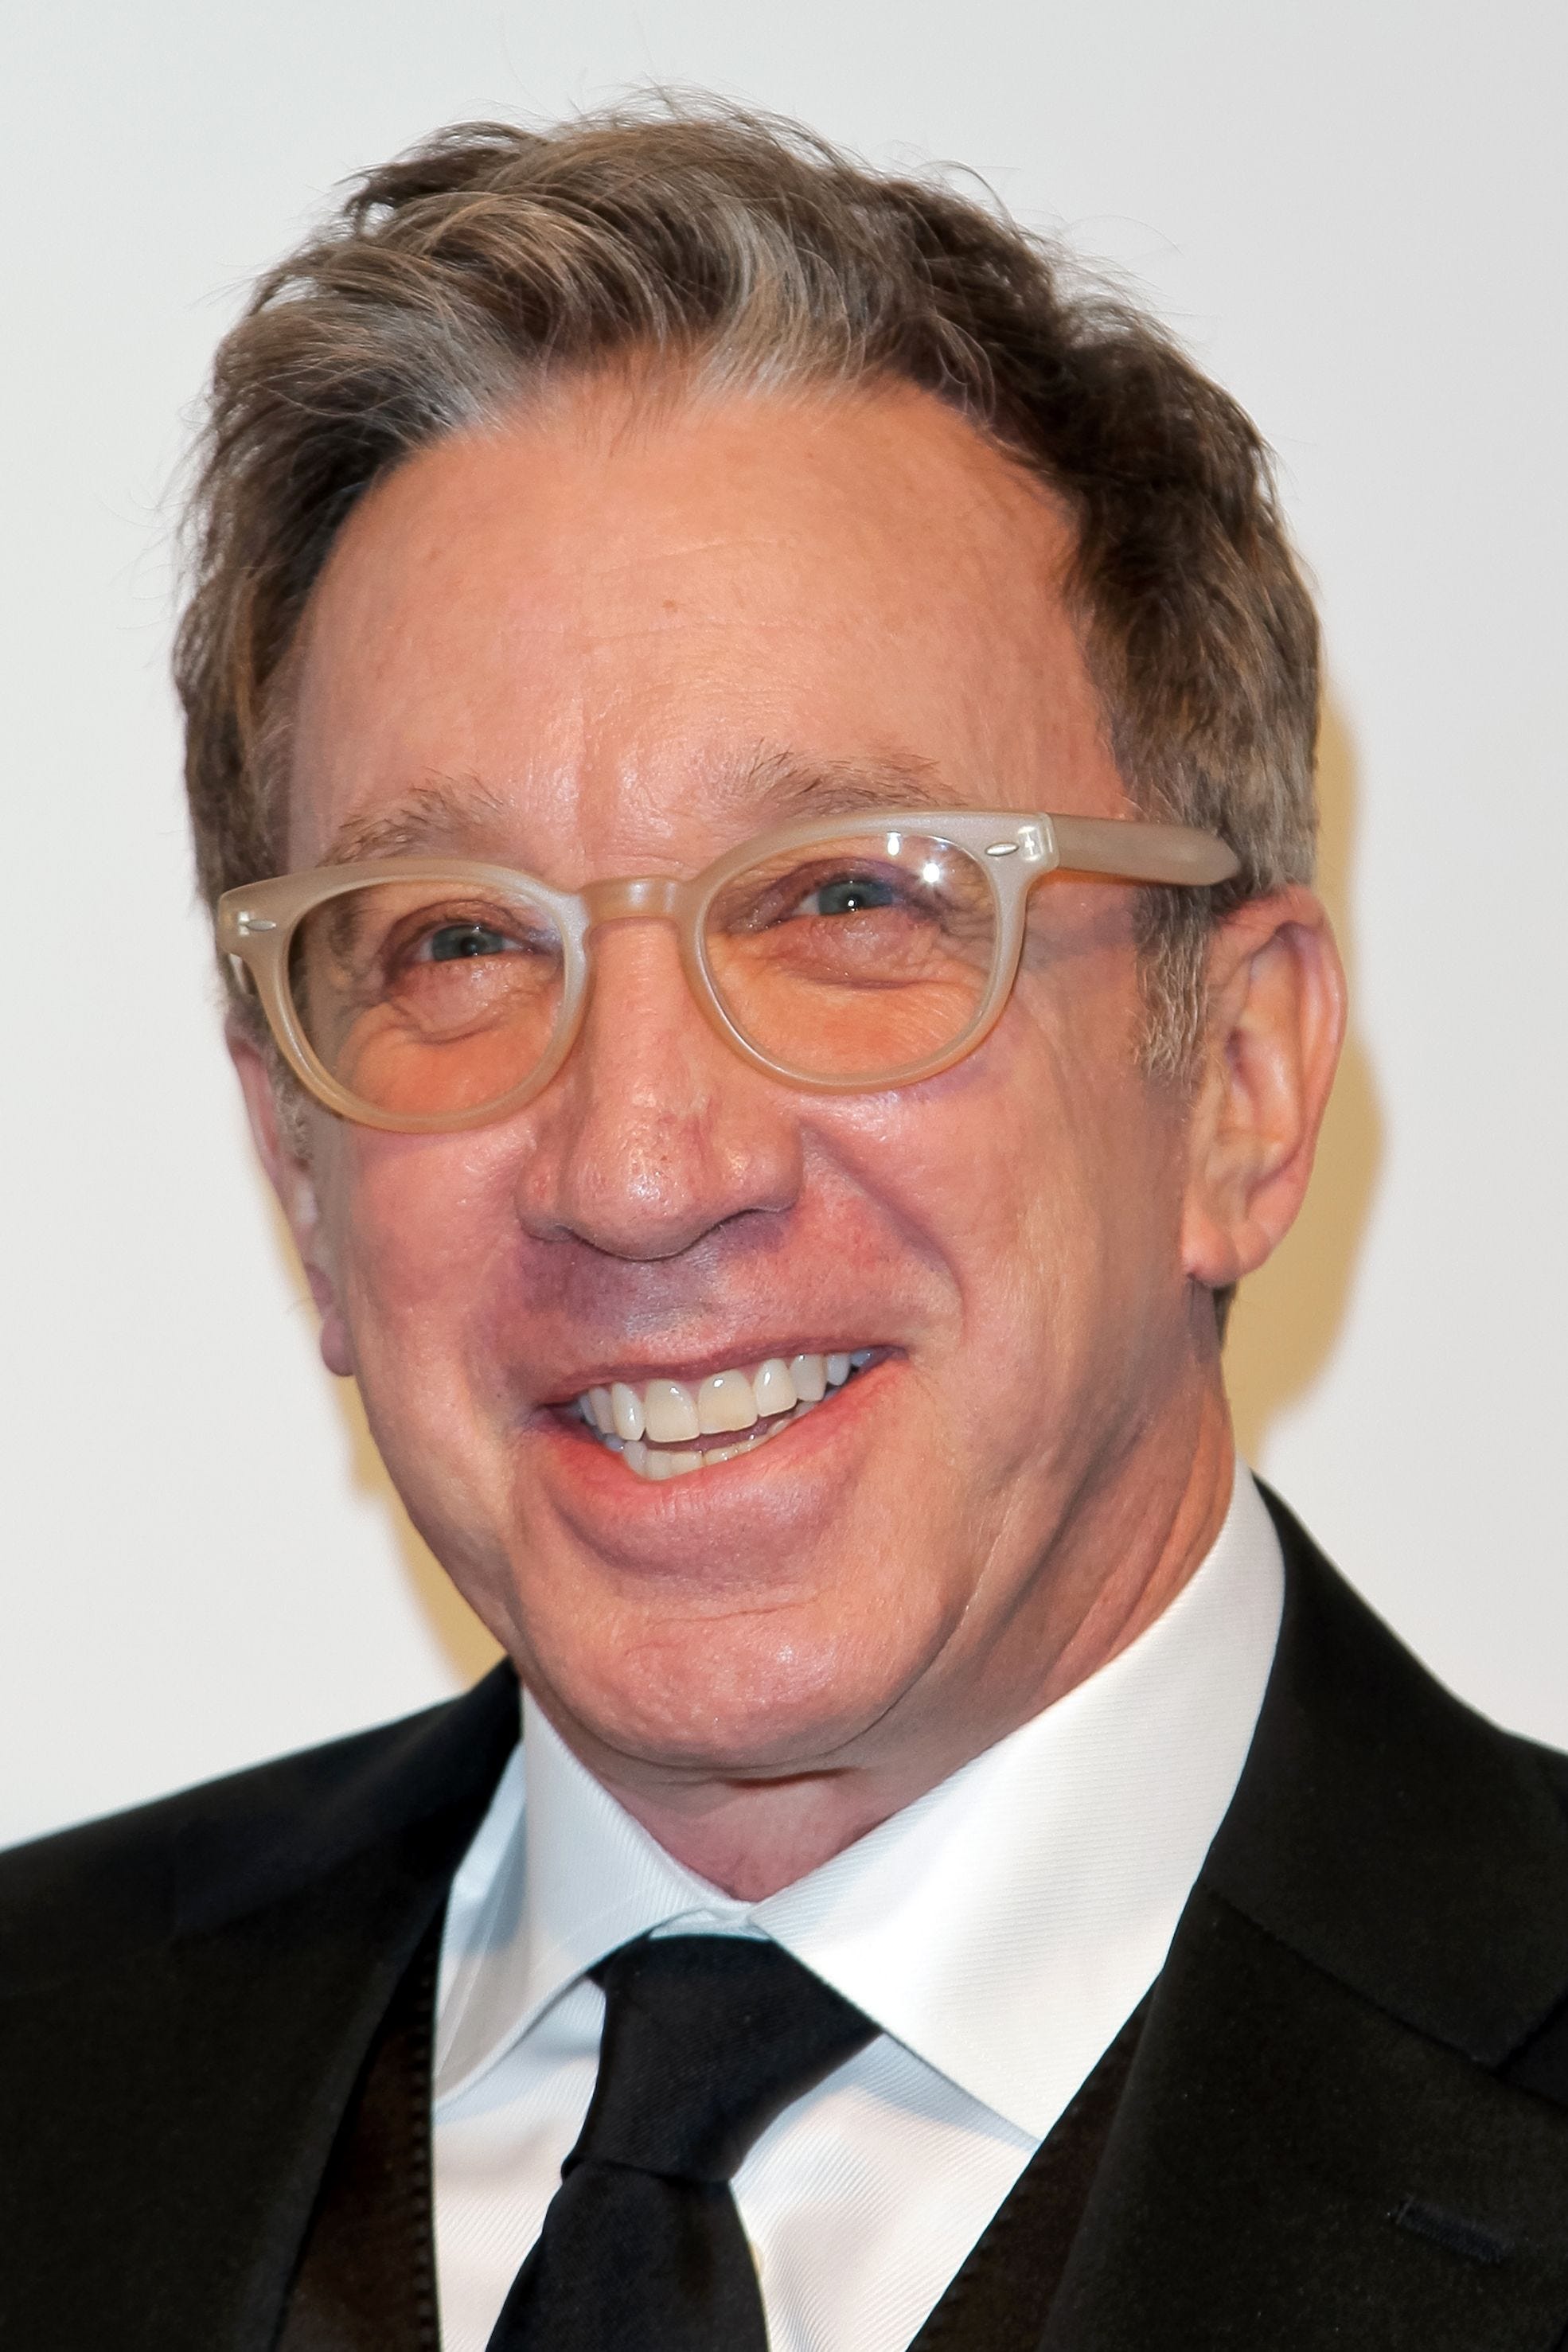 Anne Frank Center demands apology from Tim Allen for '30s Germany' remark